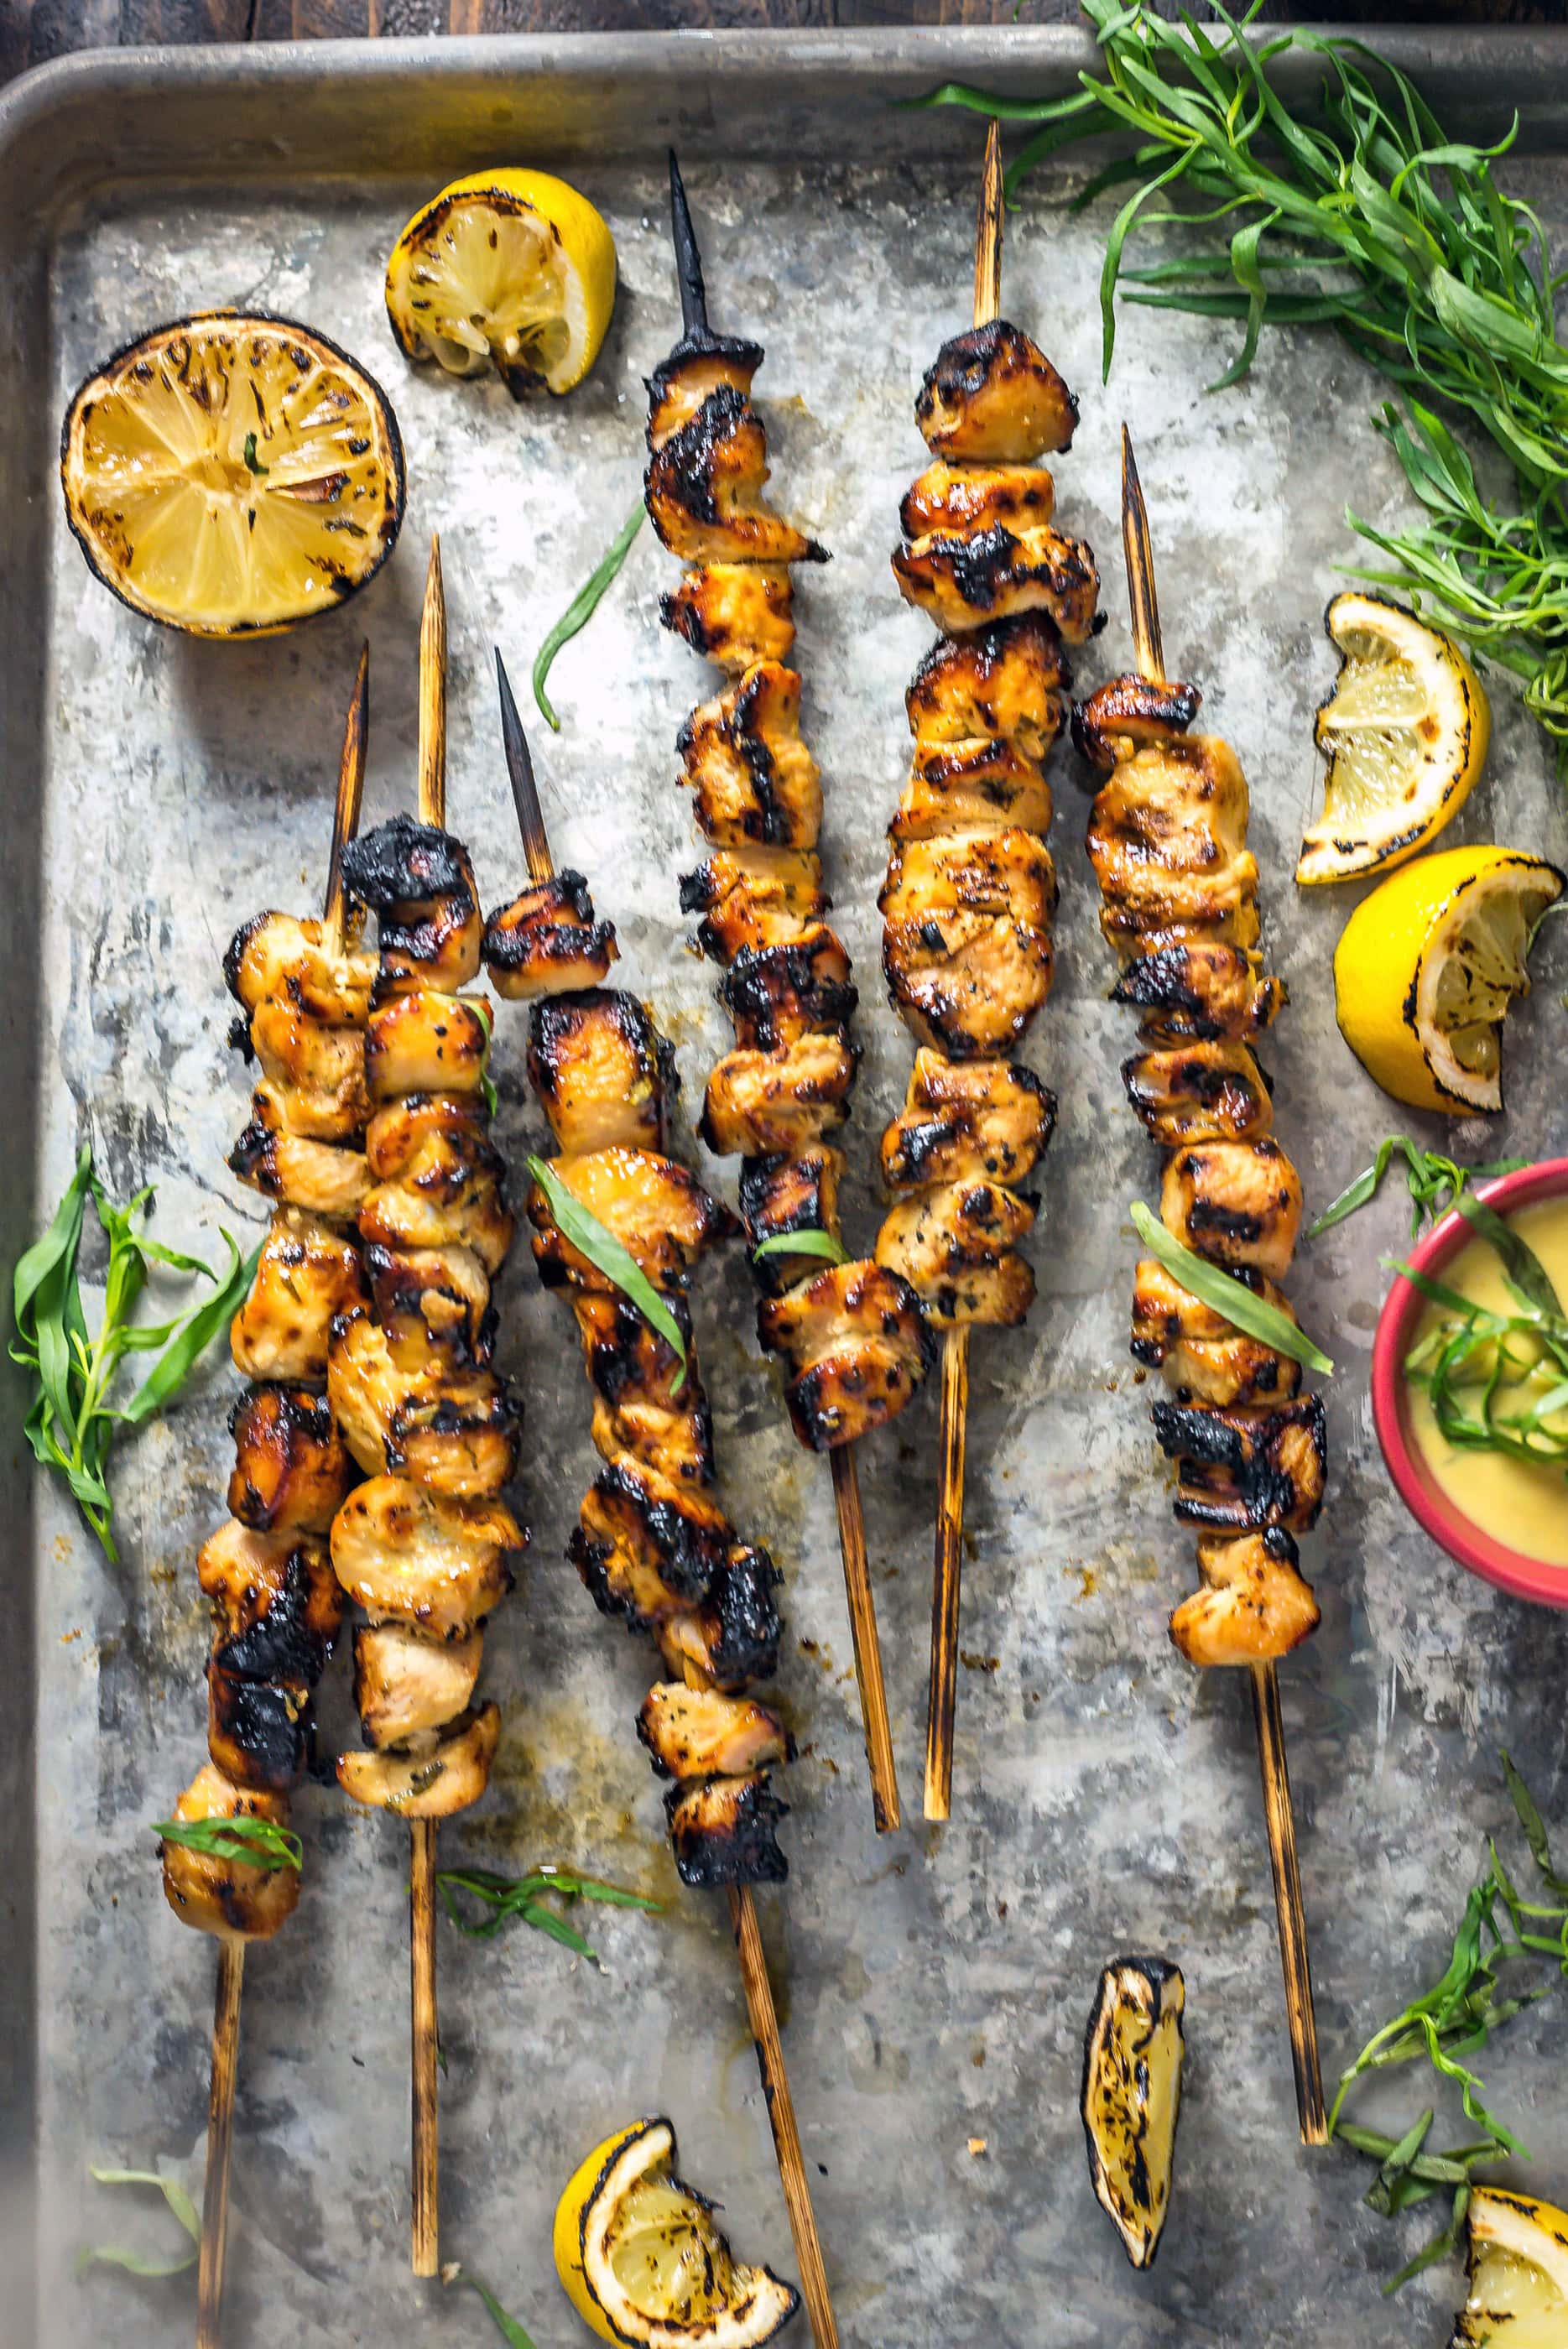 Grilled Tarragon Mustard Chicken Skewers on a baking sheet surrounded by grilled lemons.